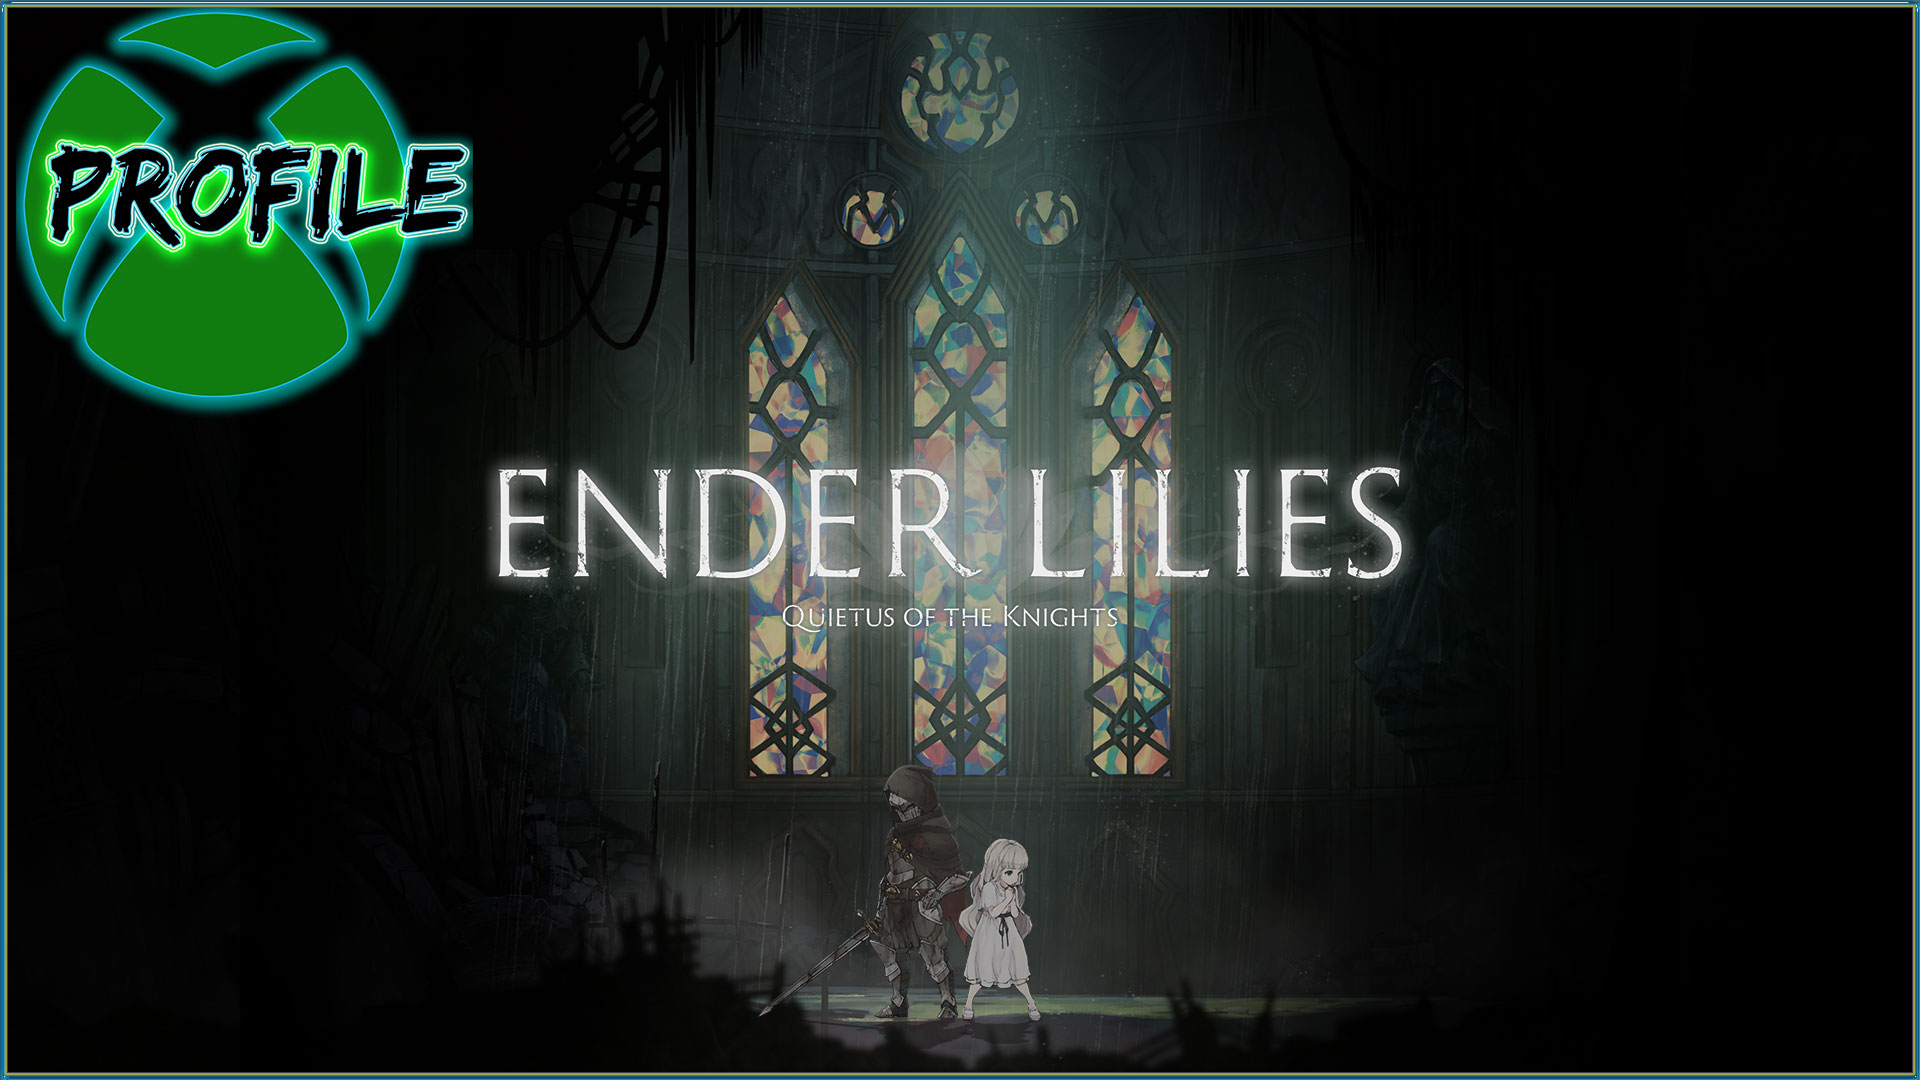 Ender lilies quietus of the knights steam фото 102